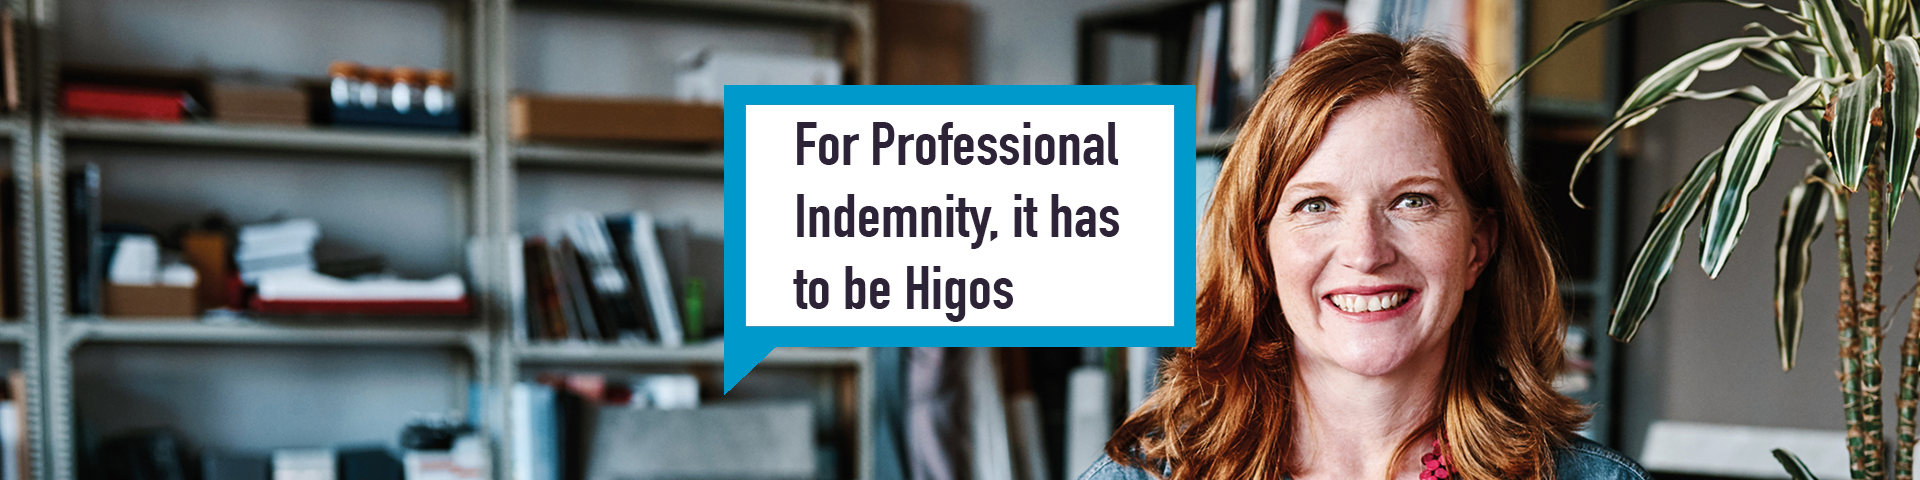 Higos Business insurance professional indemnity